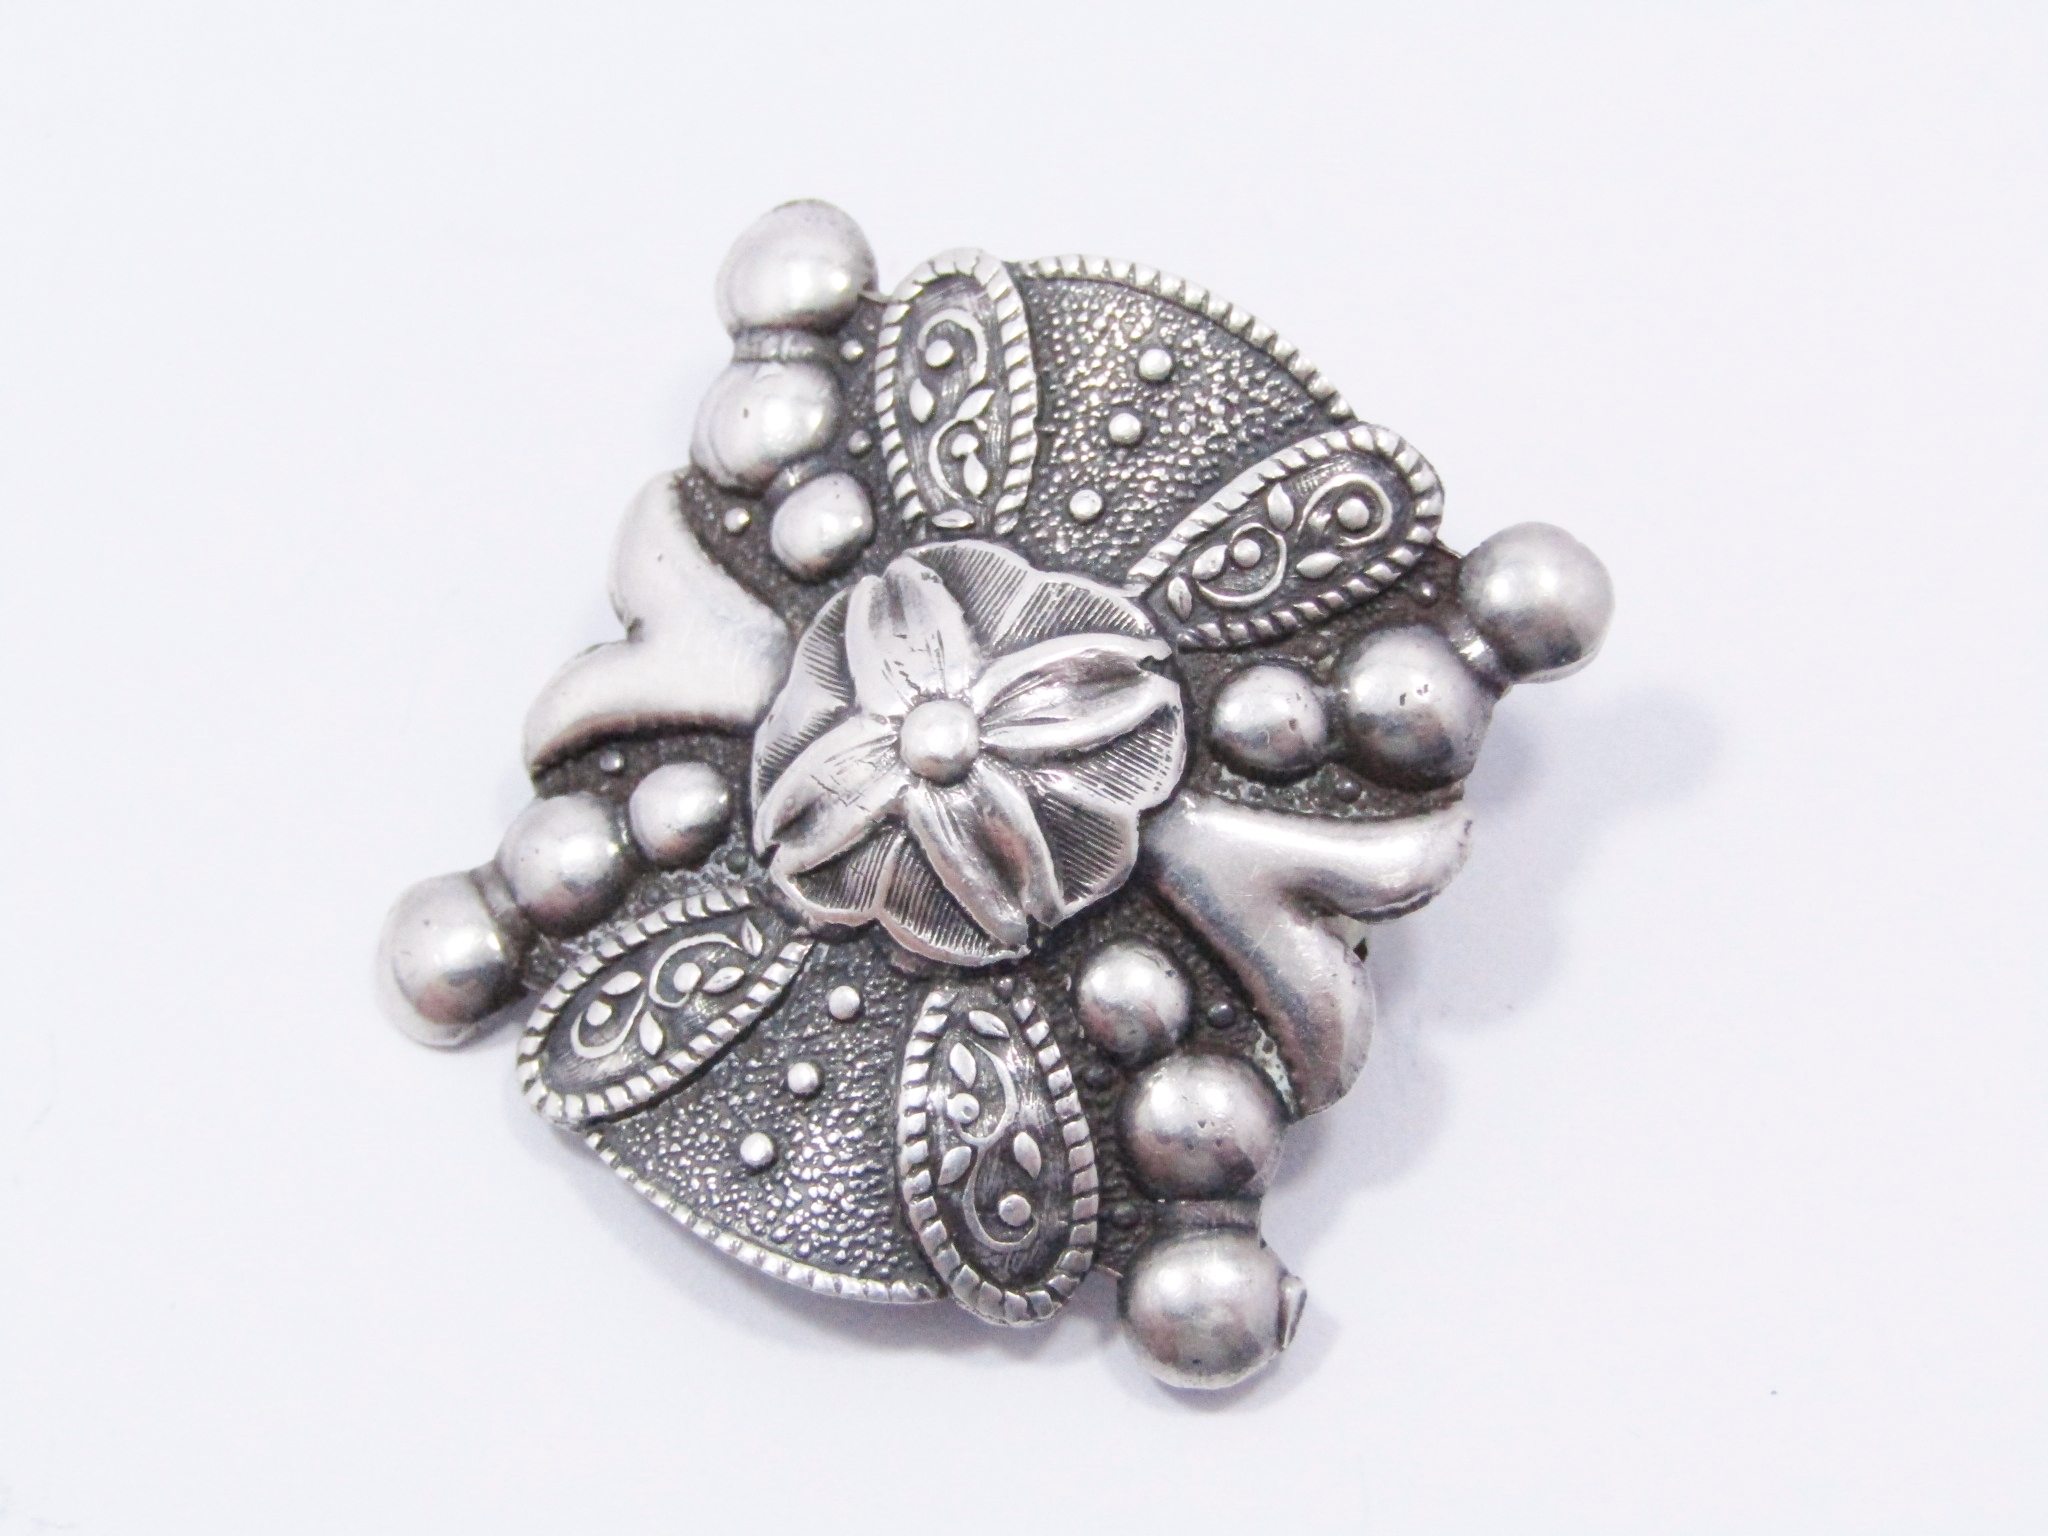 A Lovely Candida Style Vintage Brooch in Sterling Silver